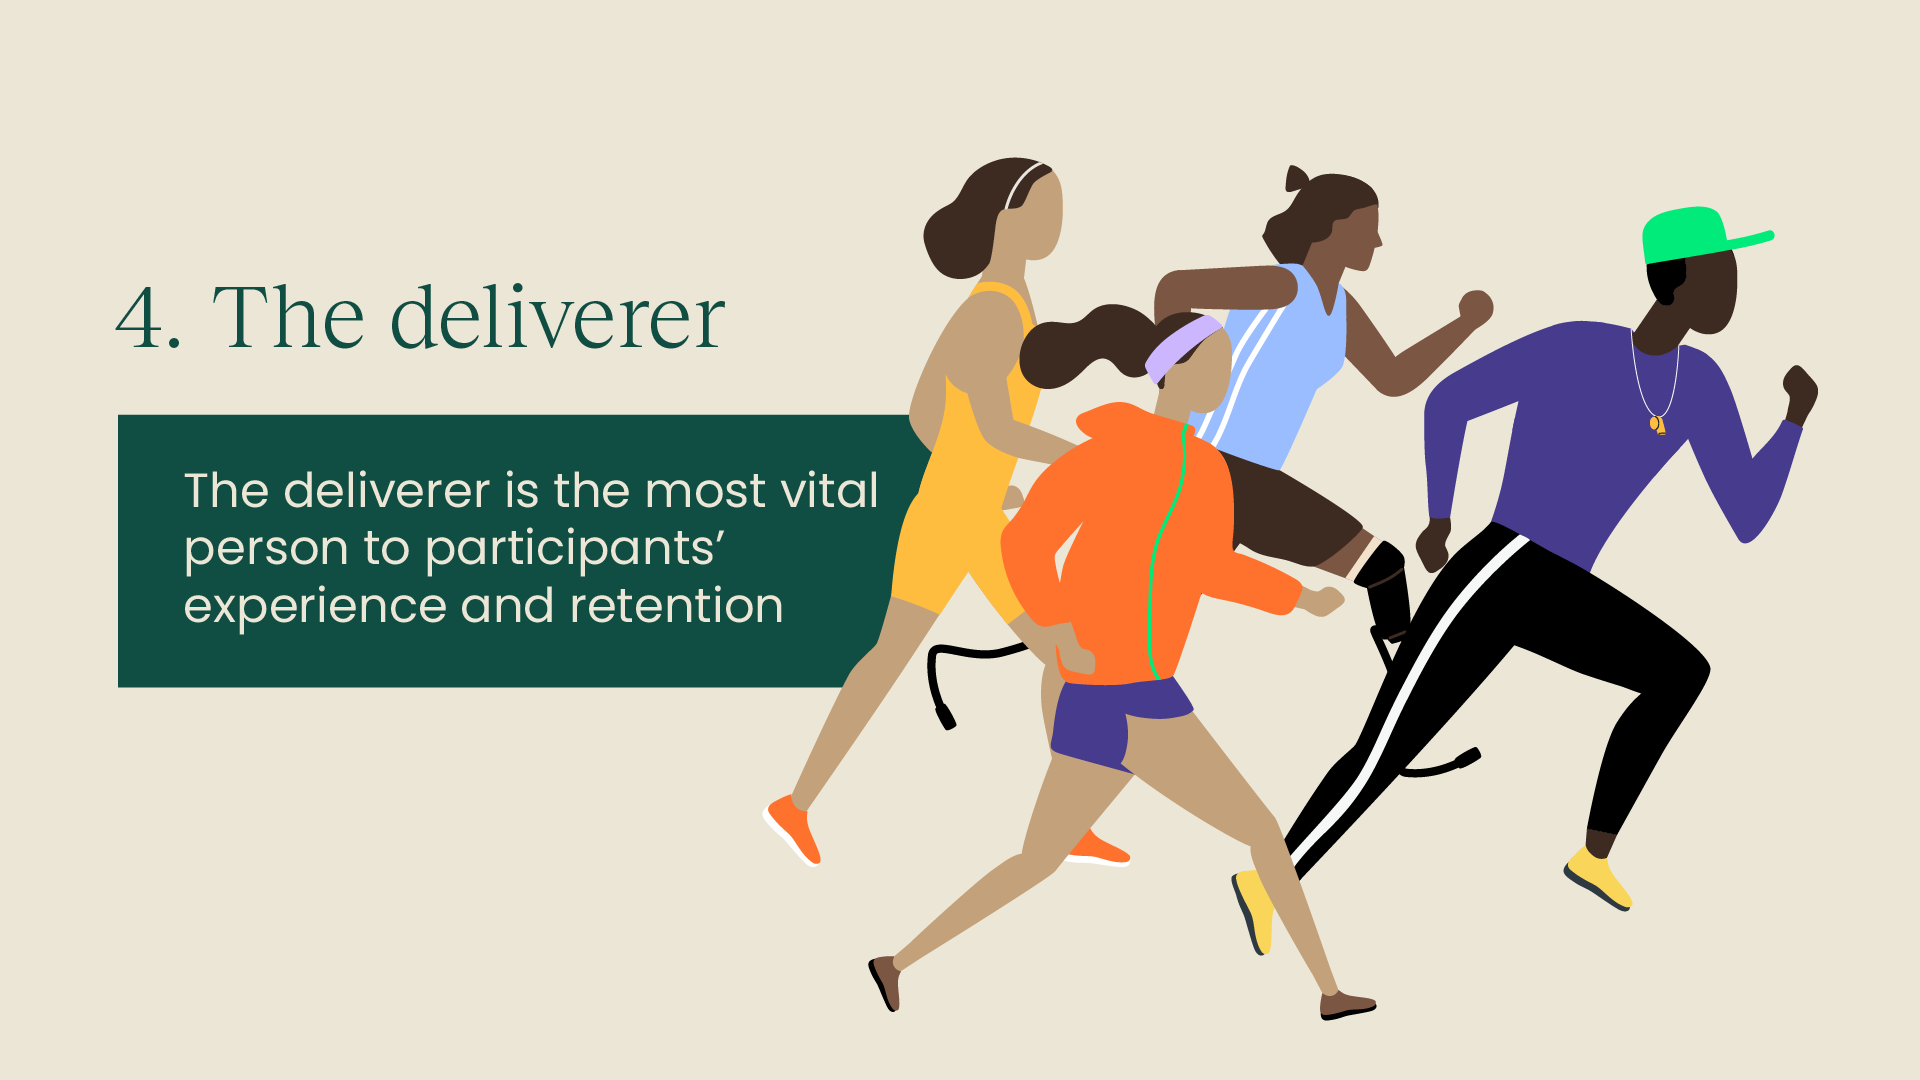 4. The deliverer: The deliverer is the most vital person to participants' experience and retention